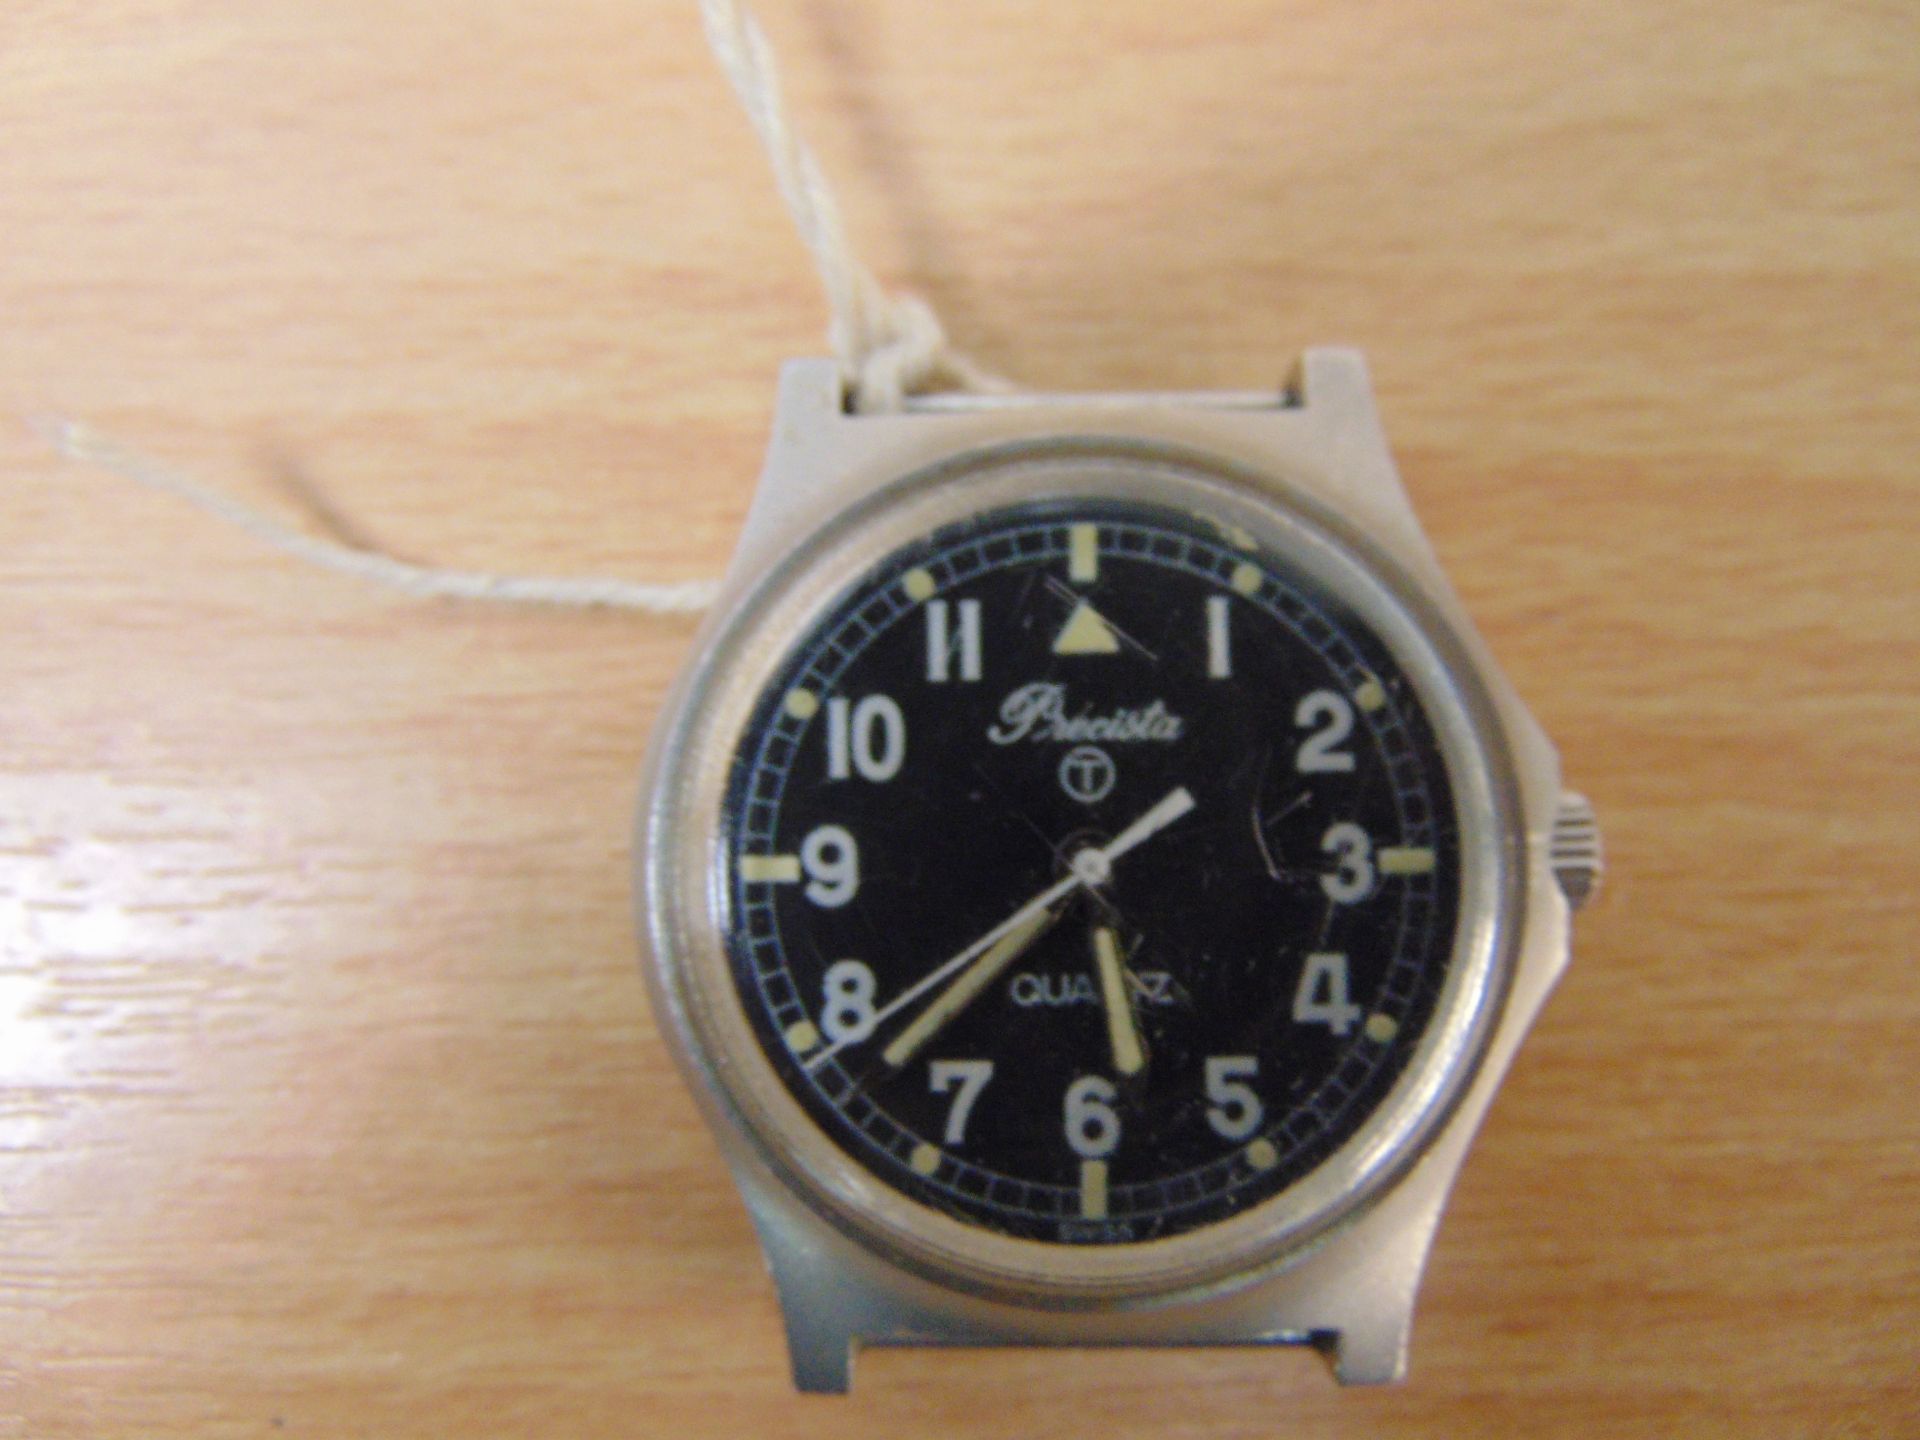 Extremely Rare Precista W10 British Army Service Watch FAT BOY Nato Marks, Date 1982, FALKLANDS WAR - Image 2 of 4